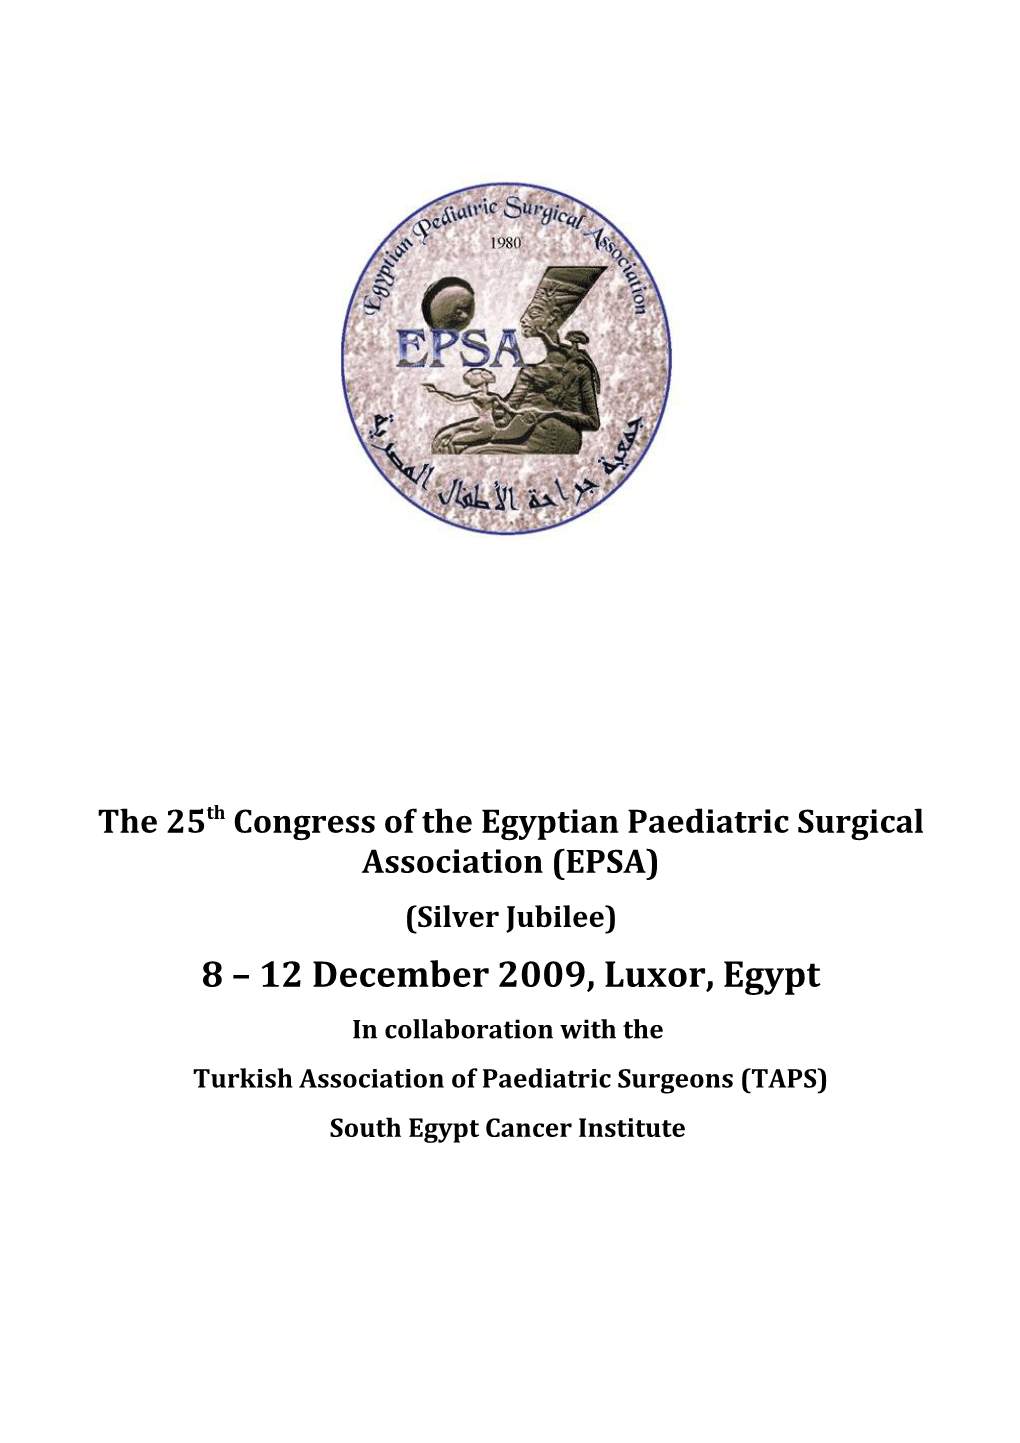 The 25Th Congress of the Egyptian Paediatric Surgical Association (EPSA)